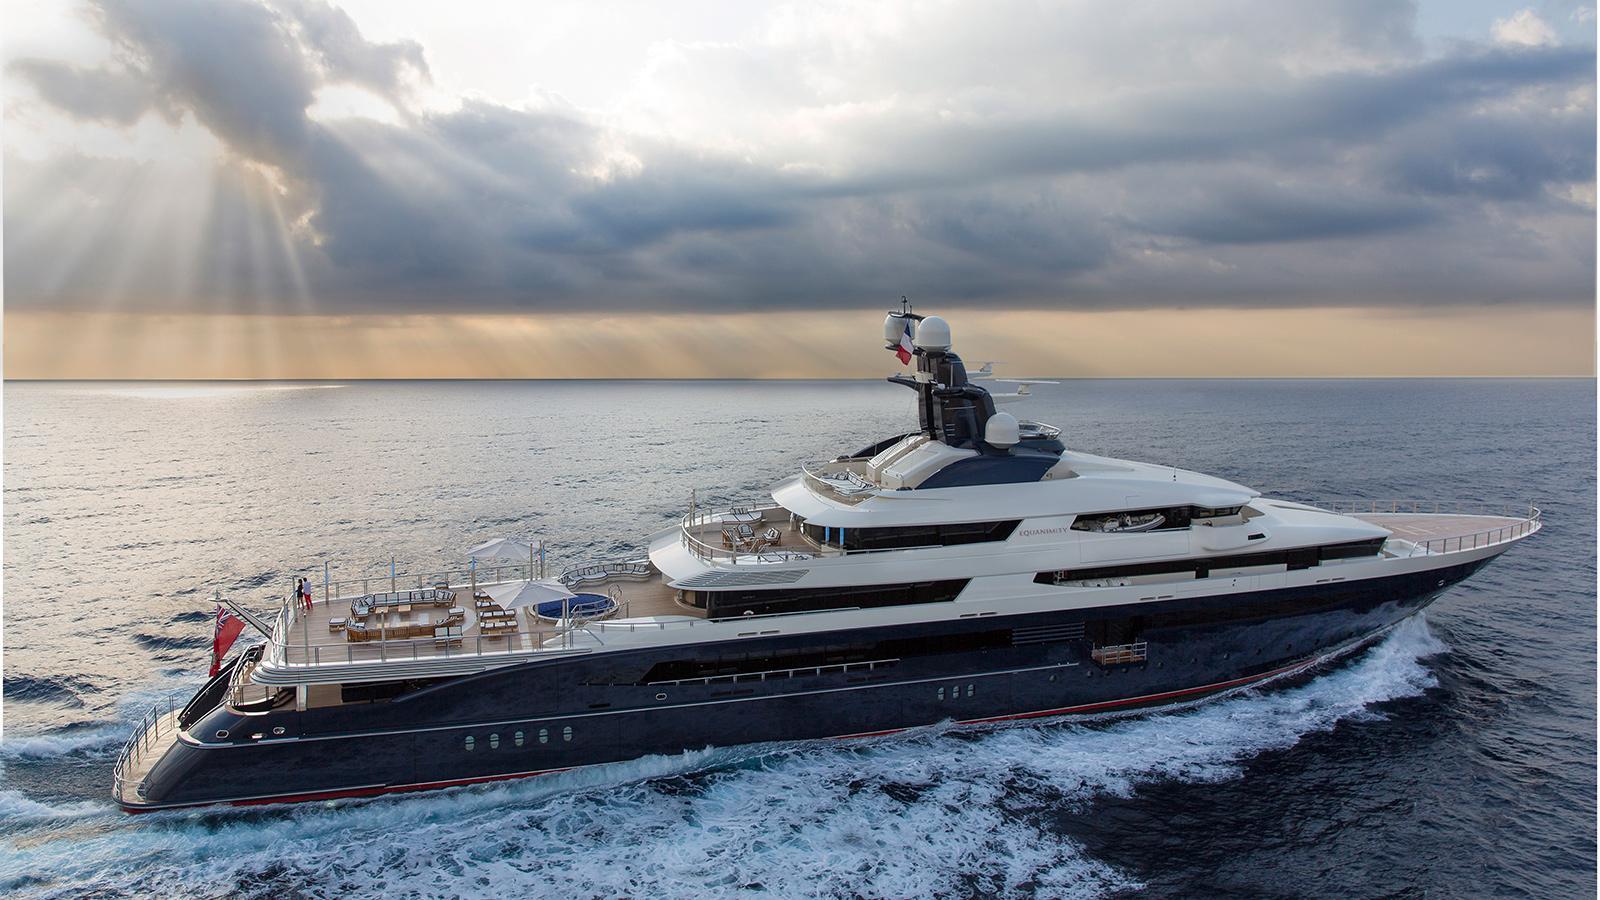 Not from an oligarch, but the first ever superyacht seized by the FBI was this $250 million vessel belonging to a friend of Leonardo Di Caprio - The 300-feet long yacht has gold leaf and marble interiors, a spectacular spa, a movie theater, and a 66-feet long swimming pool.